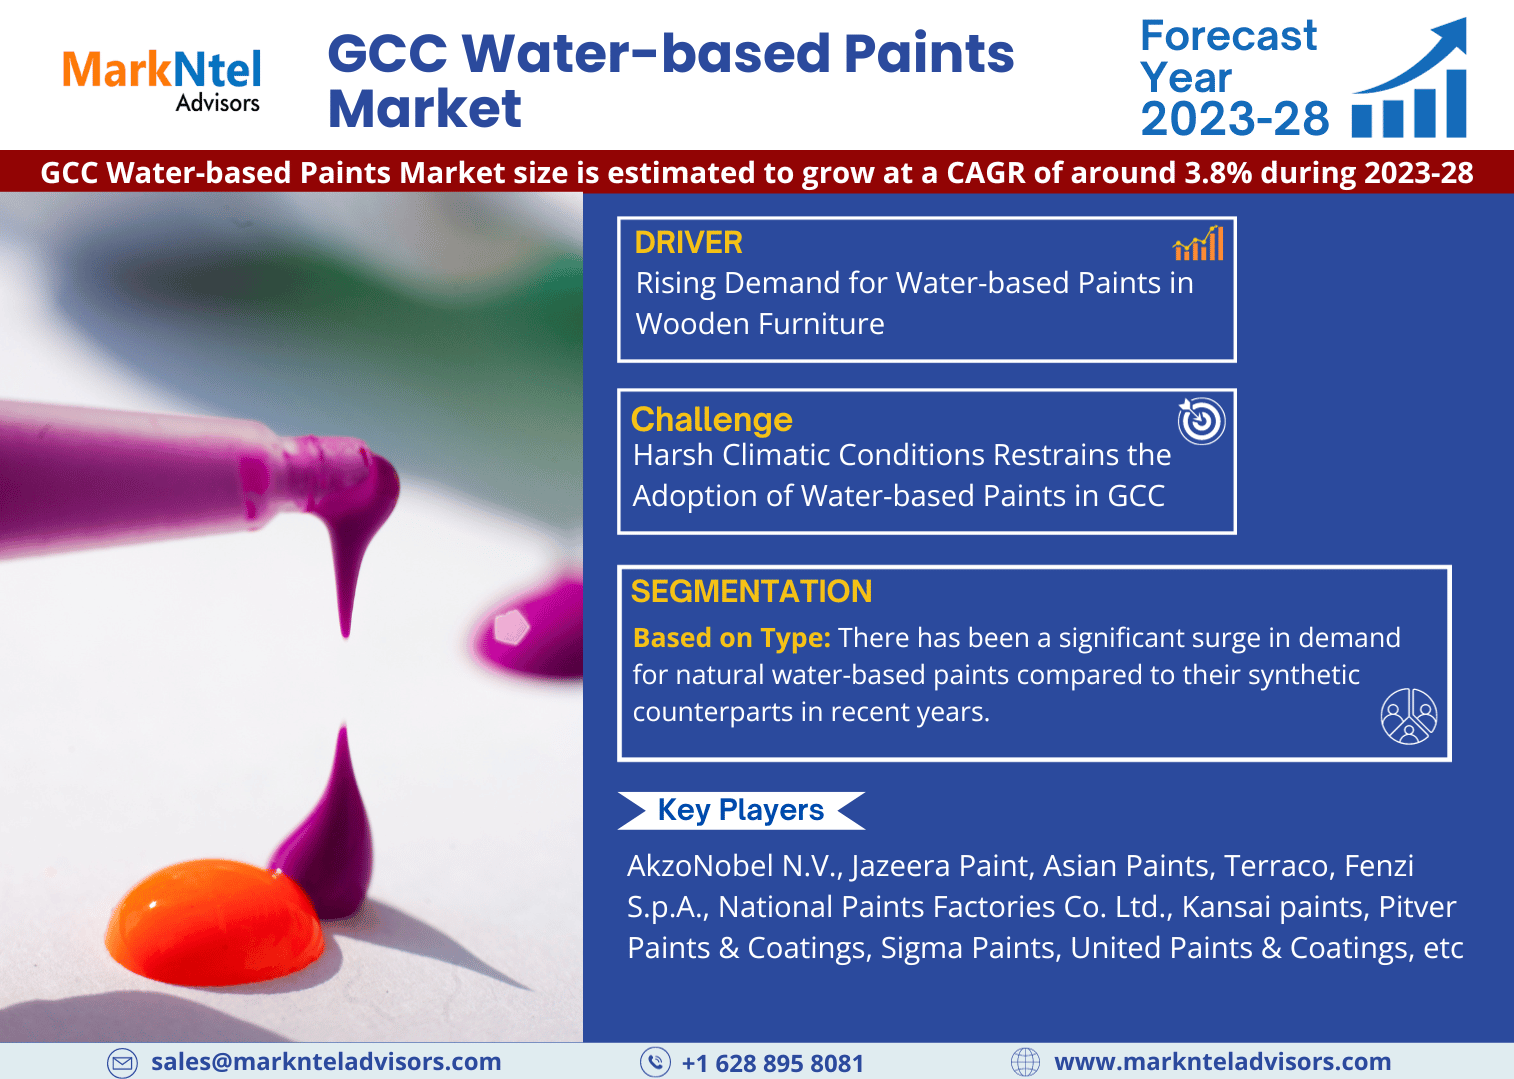 Challenges in the GCC Water-based Paints Market: Strategies for Sustaining 3.8% CAGR Forecast (2023-28)